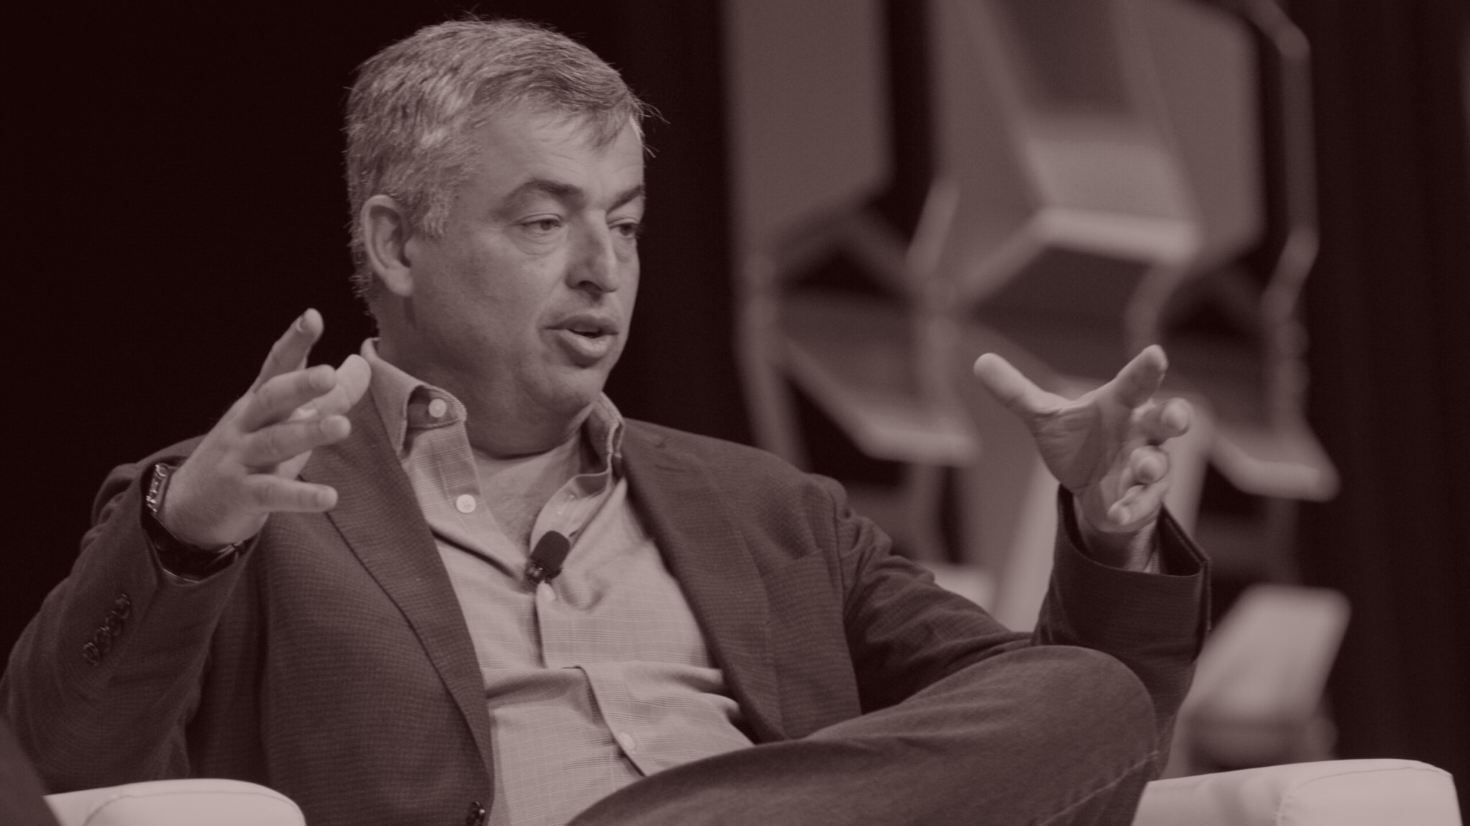 Is Apple’s Eddy Cue About to Get NFL's Sunday Ticket?